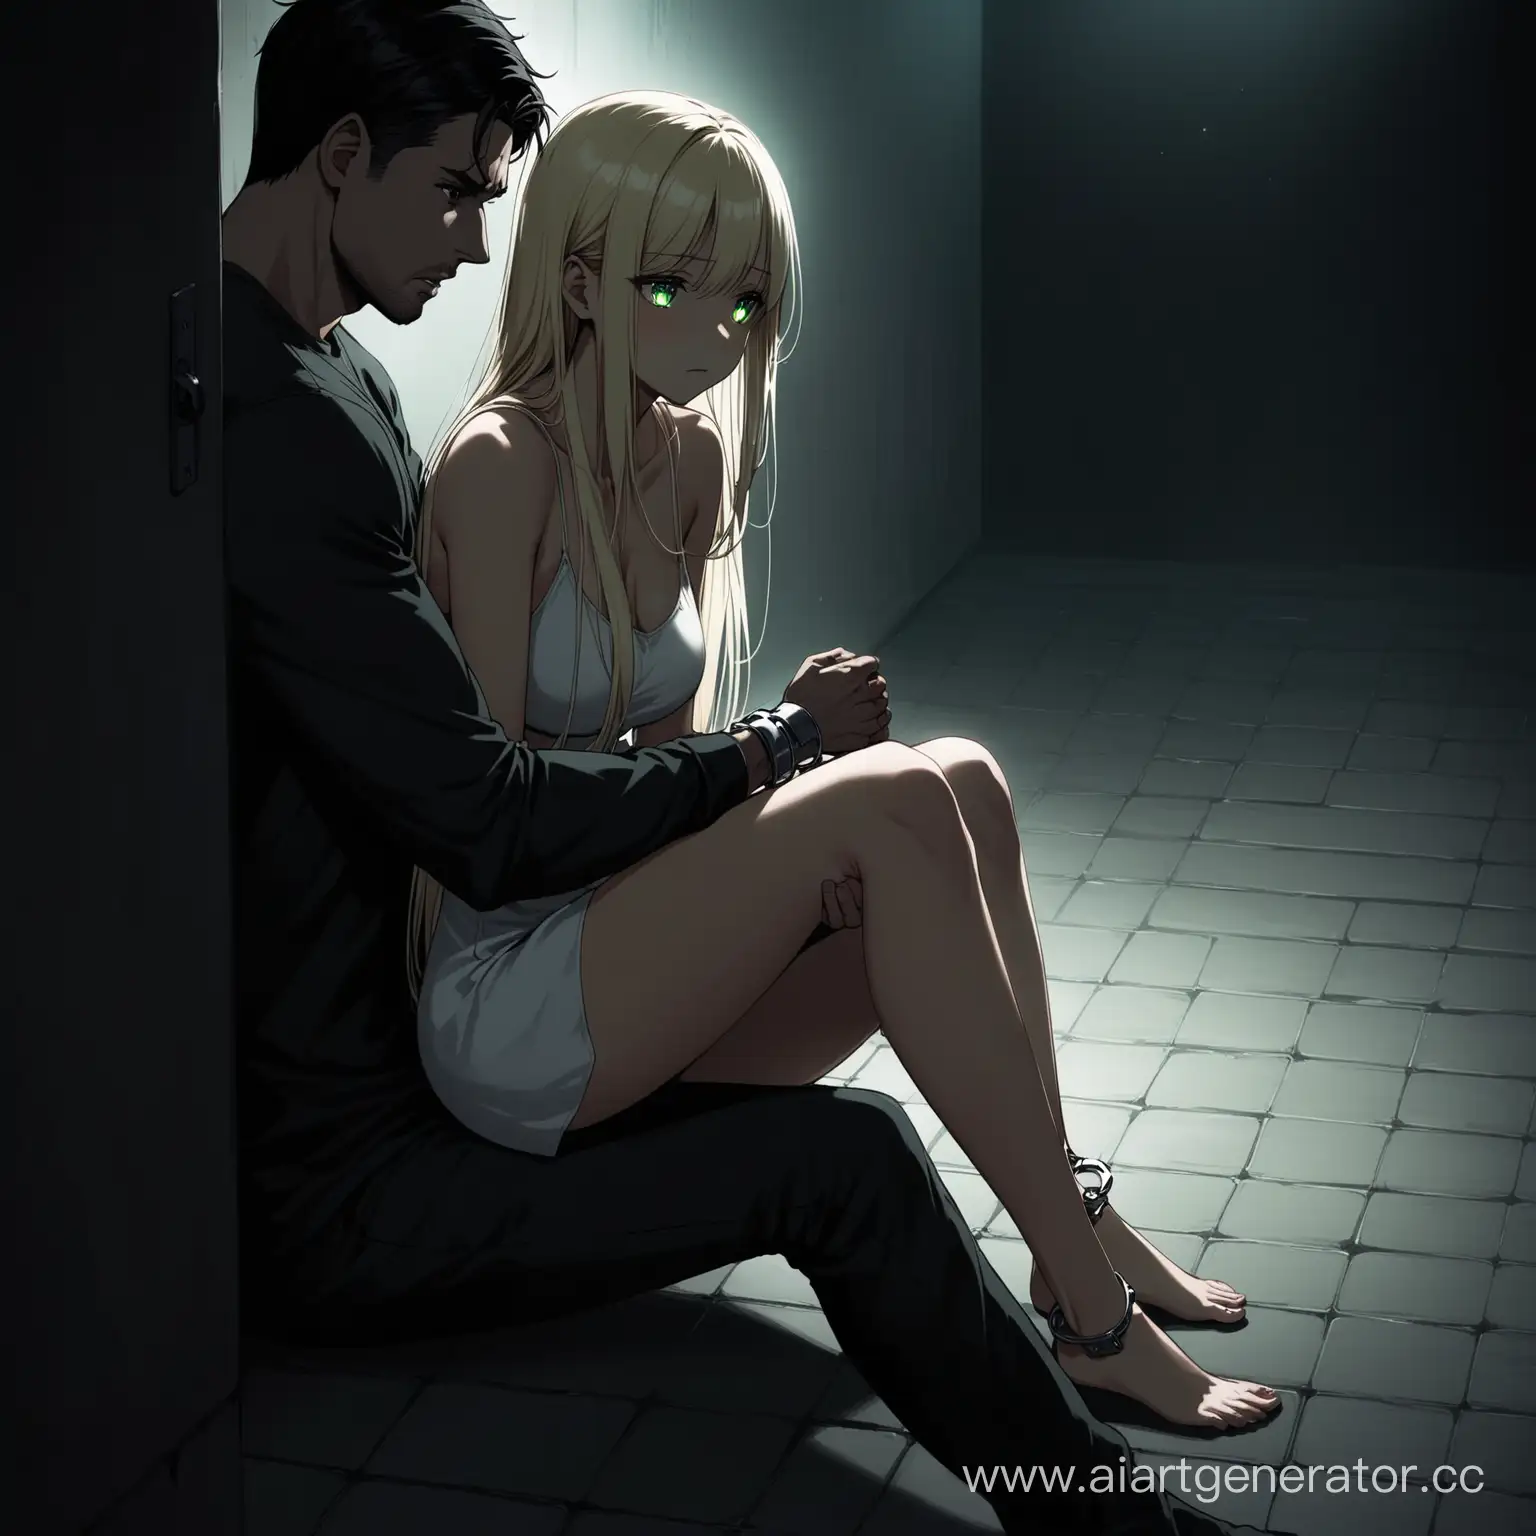 Fearful-Blonde-Girl-in-Handcuffs-Confronted-by-Tall-WhiteHaired-Man